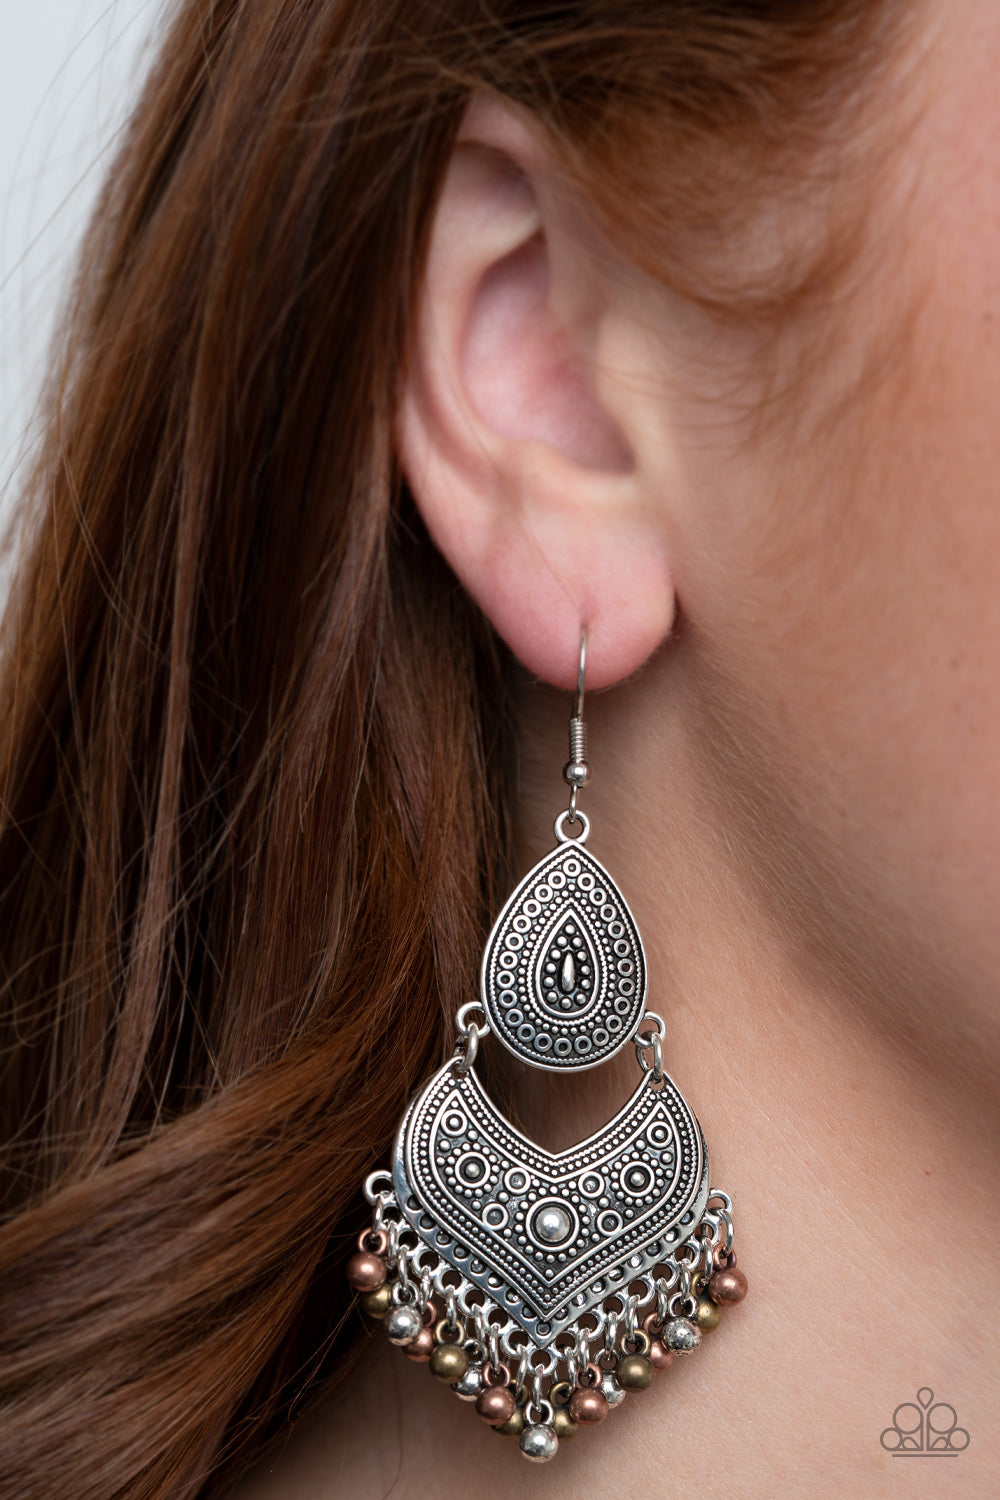 Paparazzi Earring Music To My Ears Multi Earring in a Tribal Inspired antique silver frame